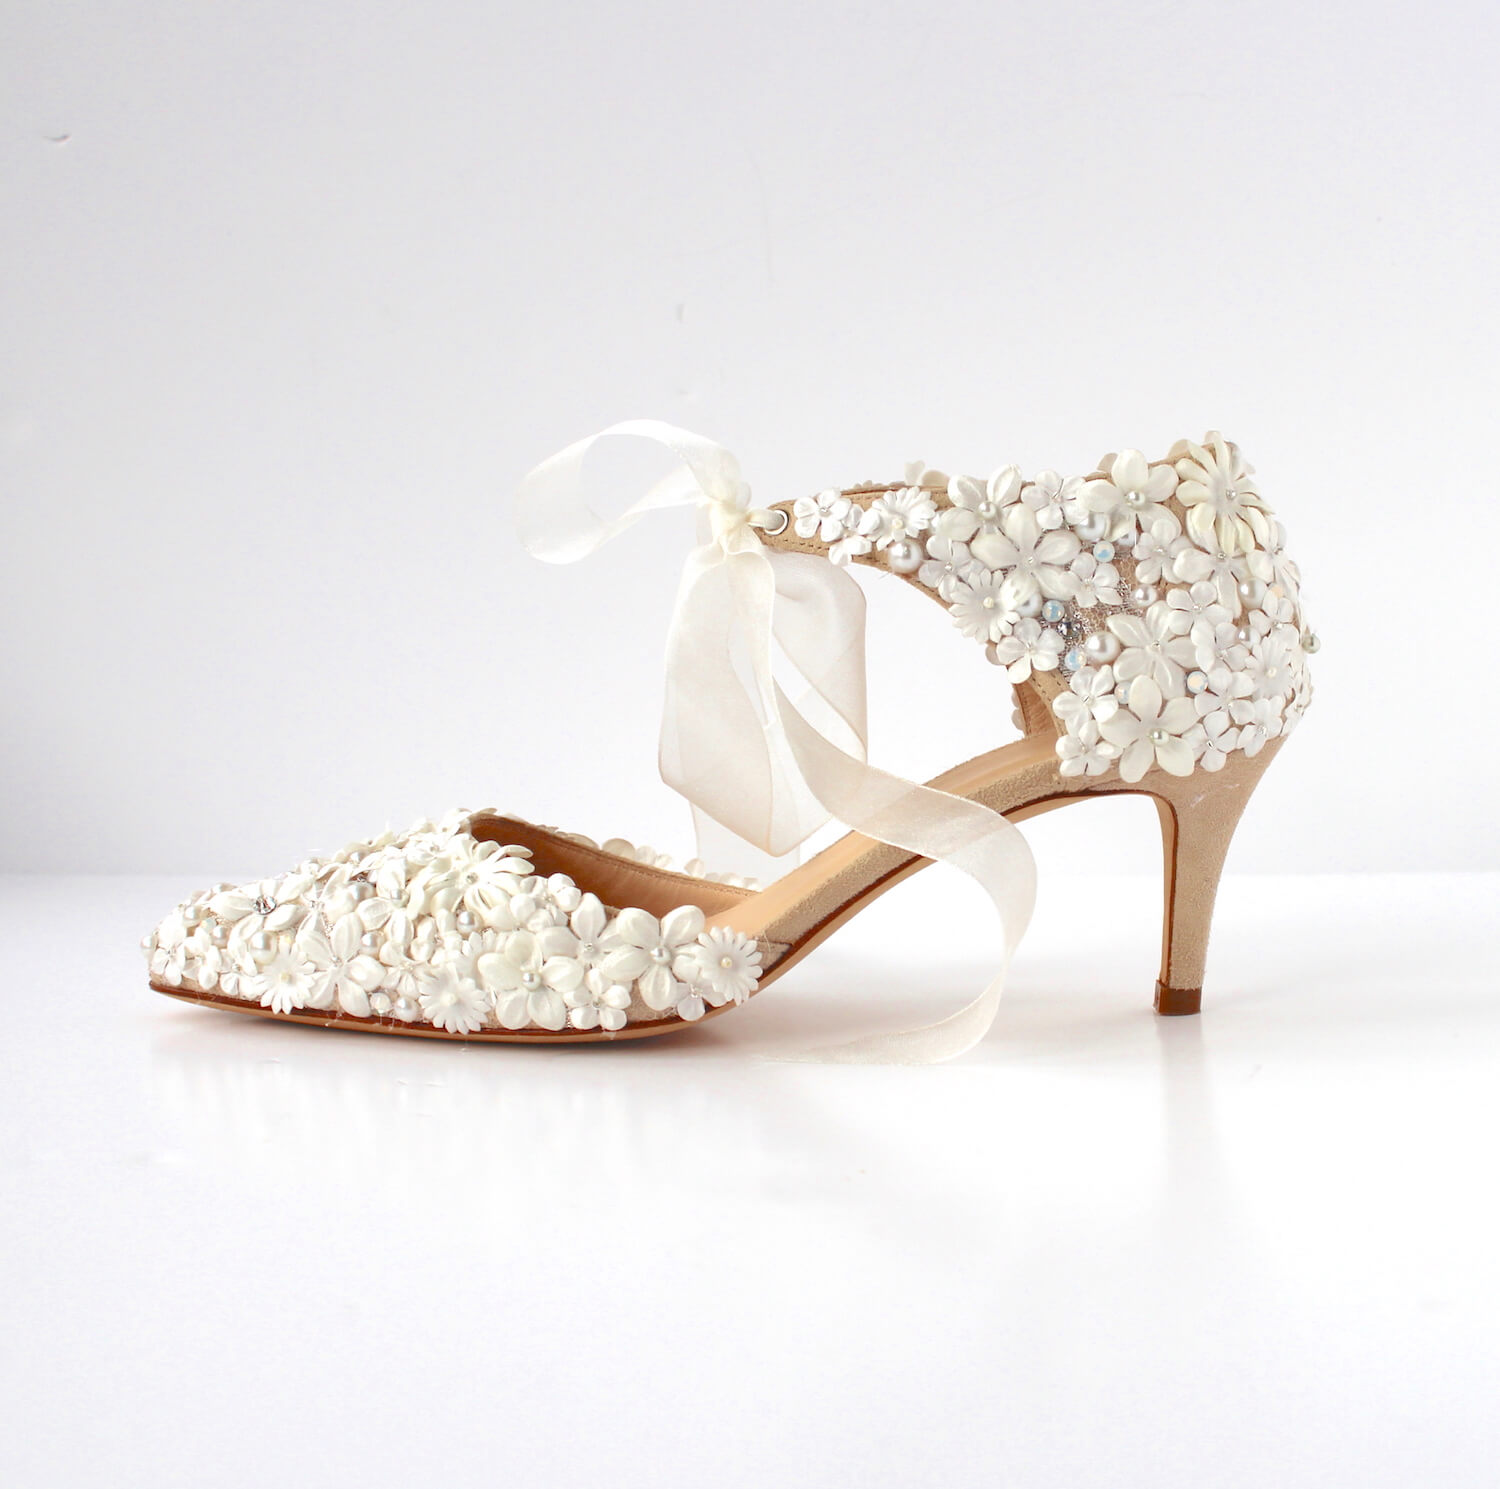 Hand embellished wedding shoes by British shoe designer Di Hassall